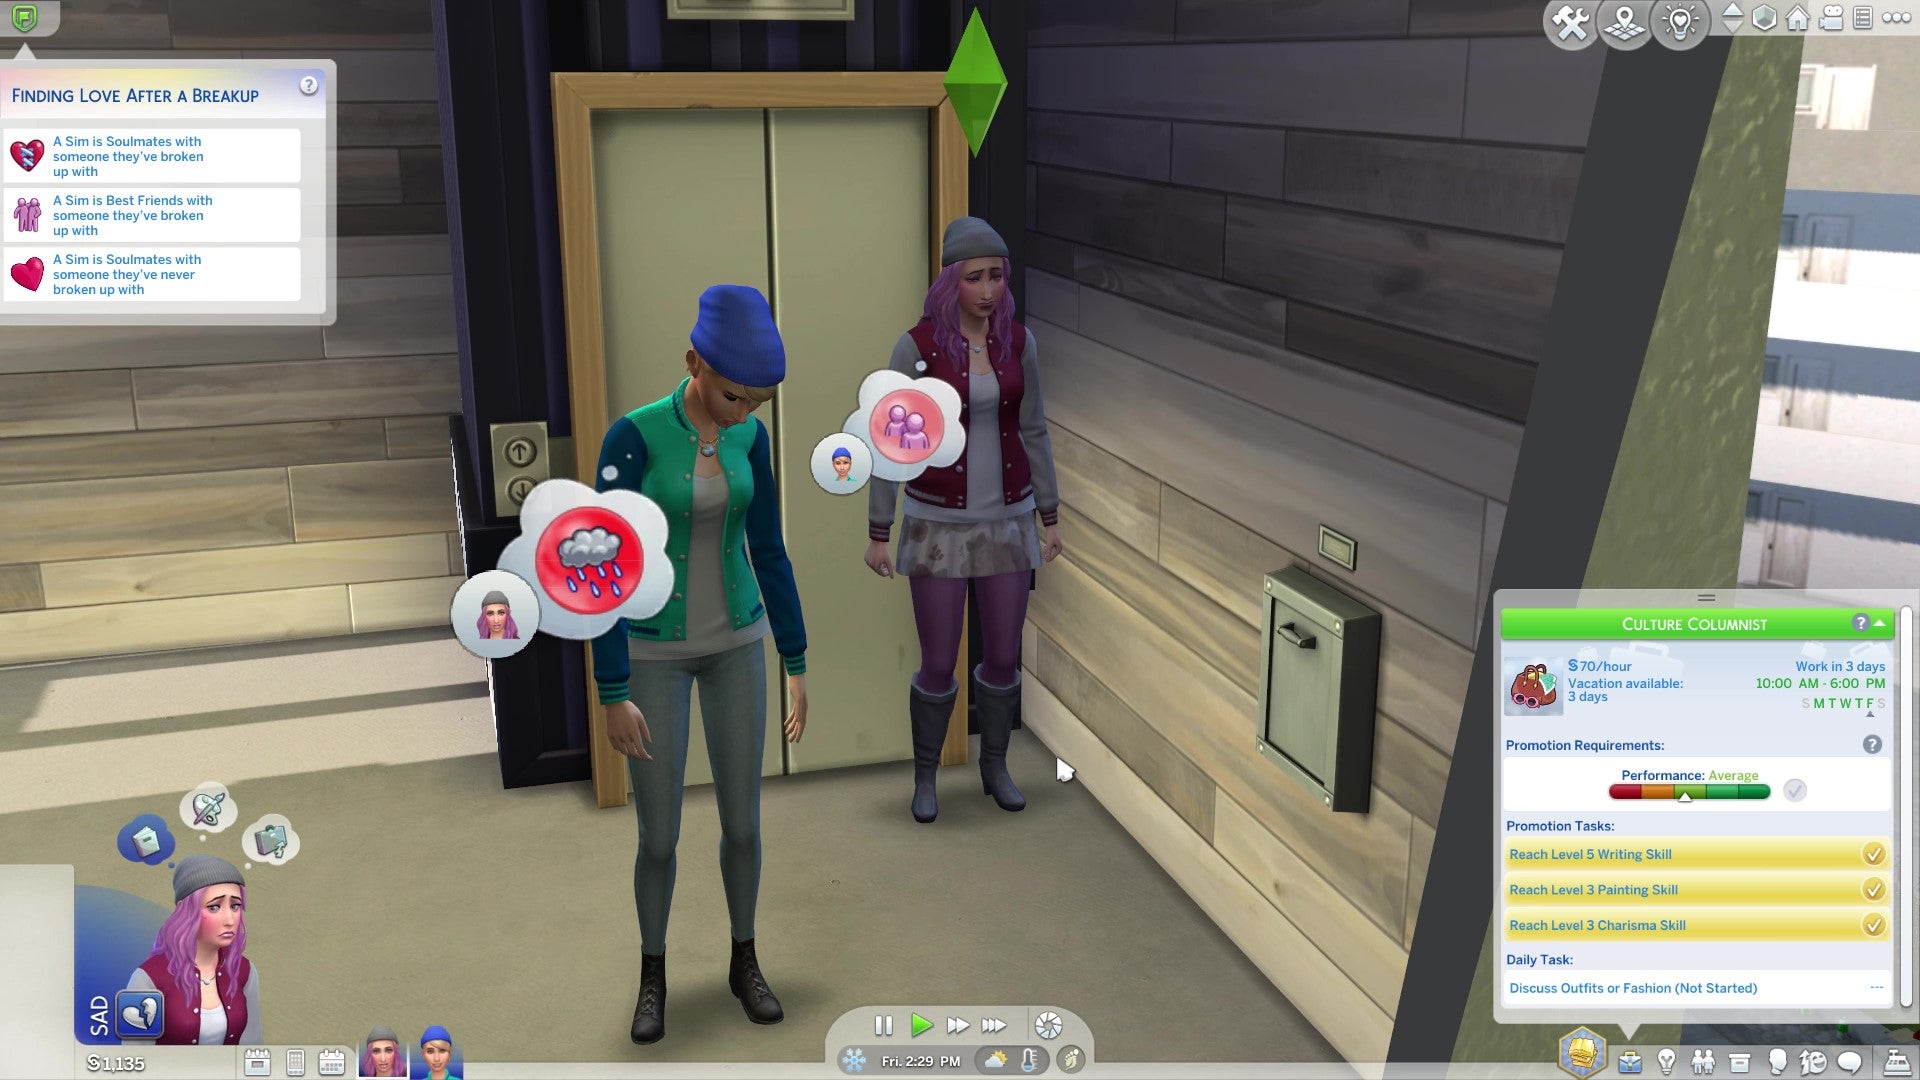 An in-game screenshot of a Sims 4 Scenario, showing the Scenario icon and victory conditions list.